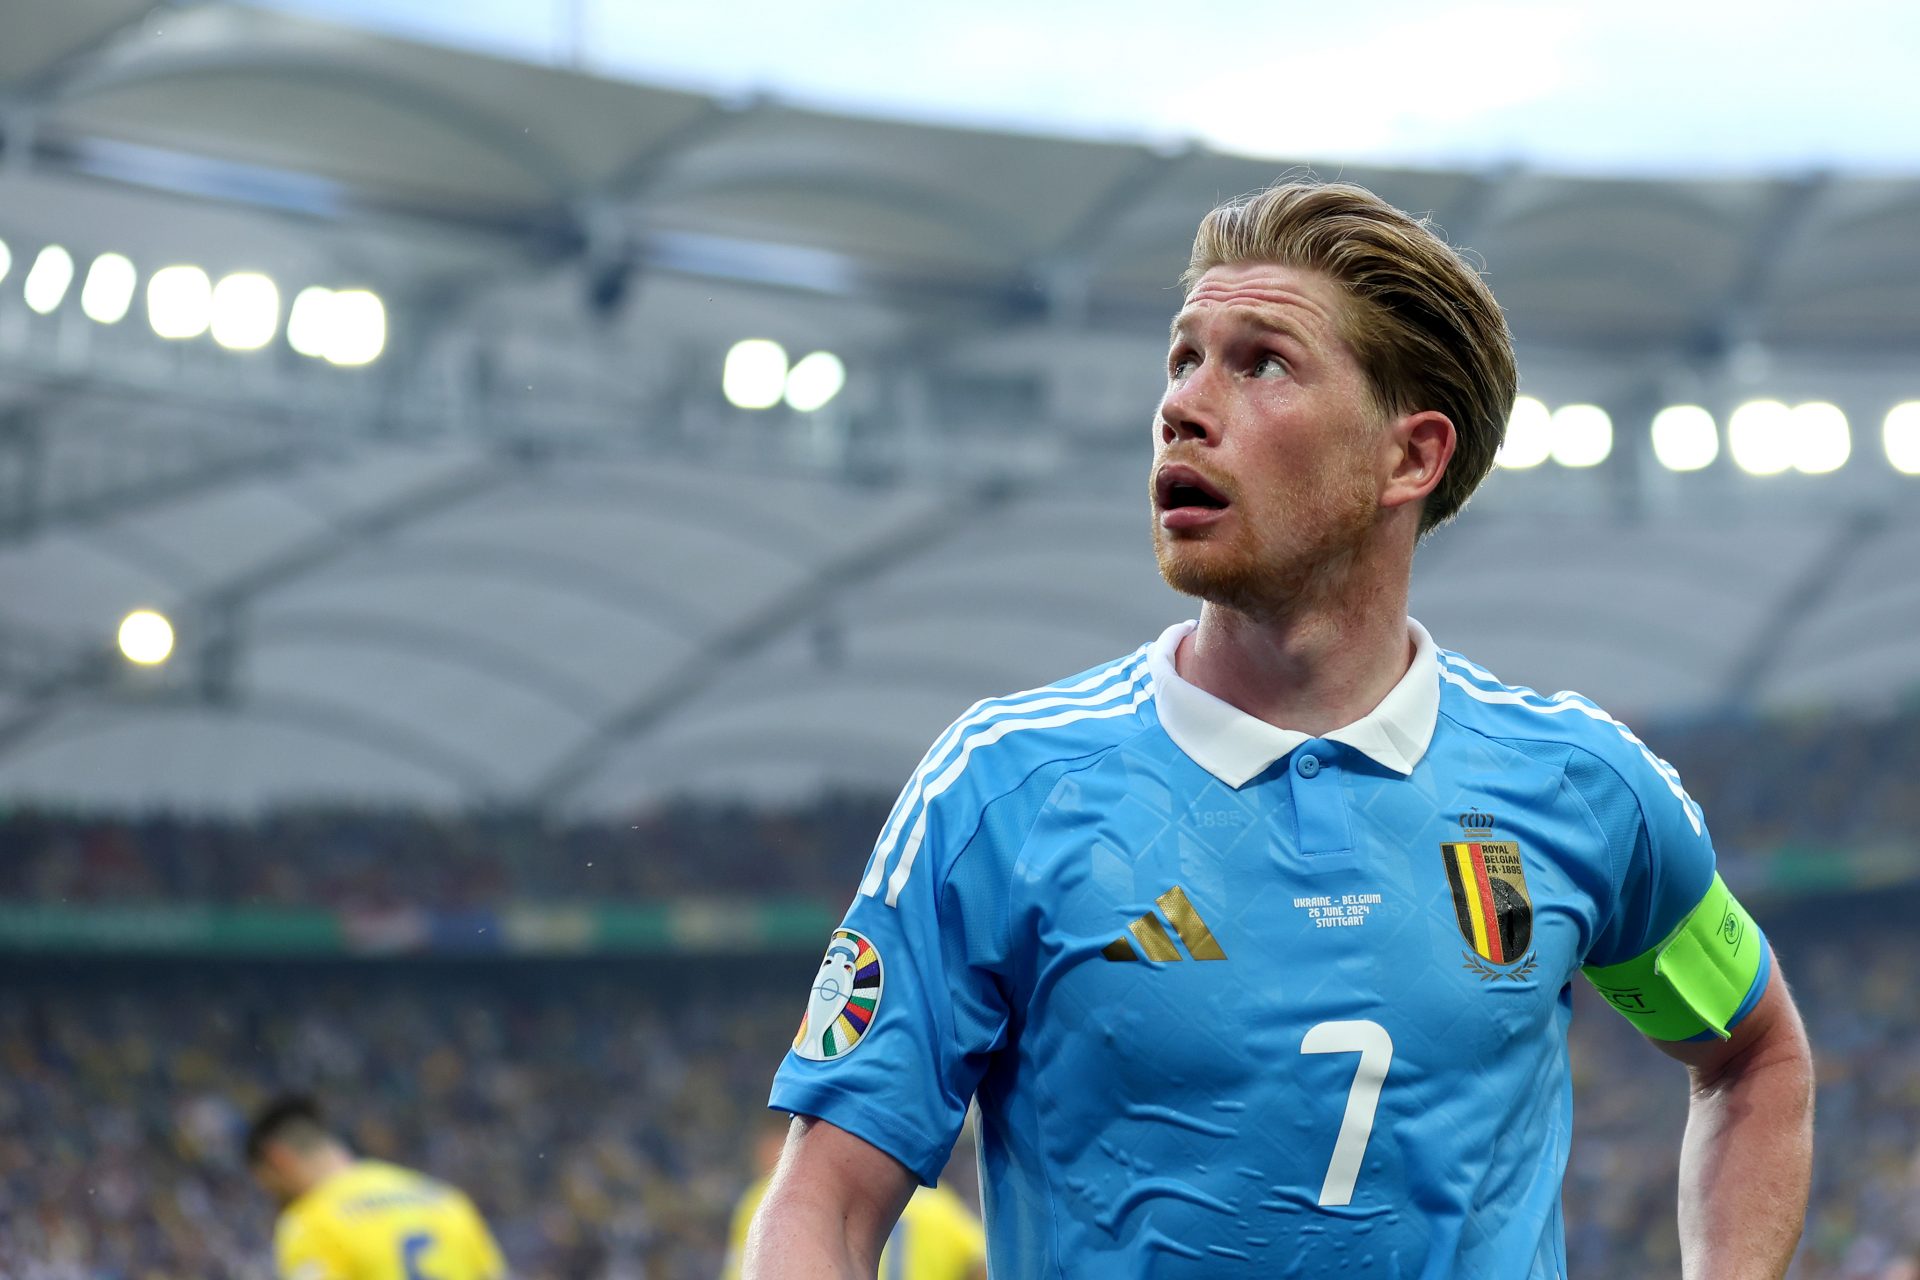 'What will you tell us then!?': Kevin De Bruyne clashes with booing Belgium fans